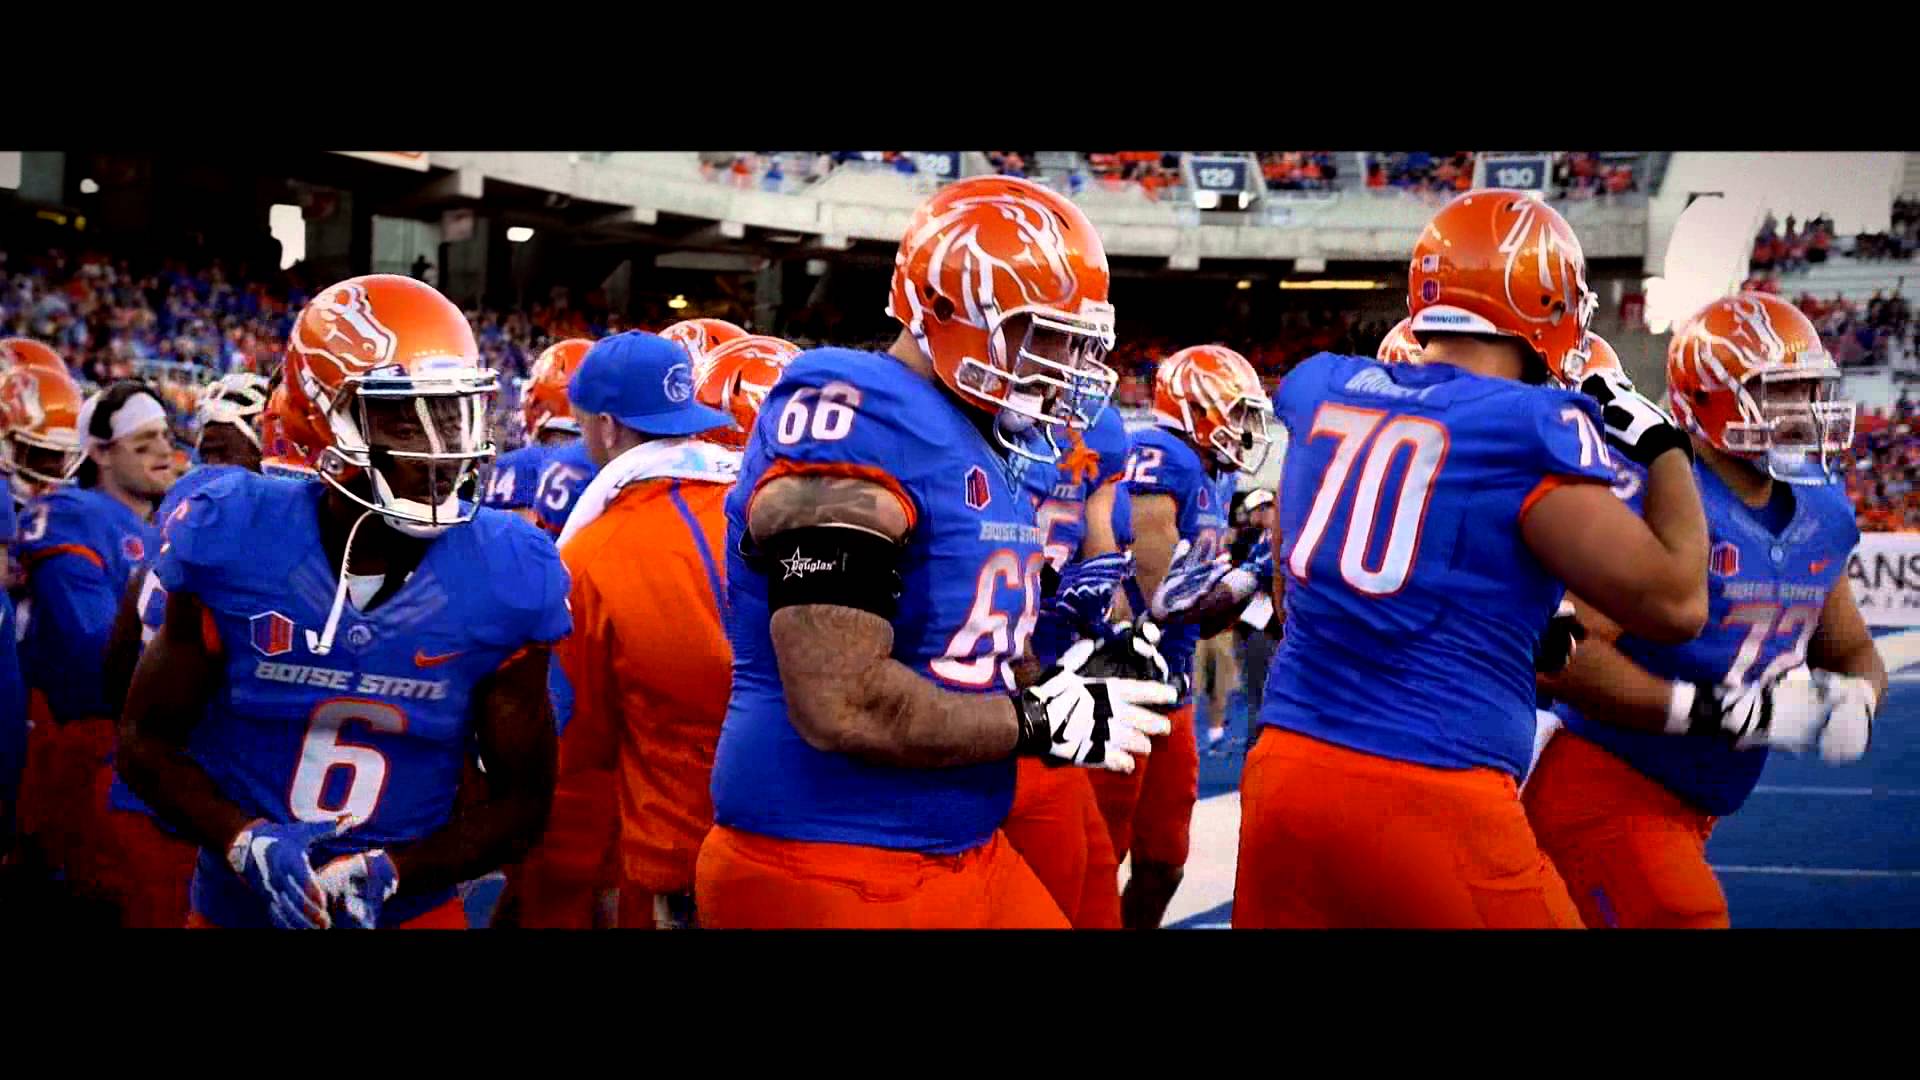 Boise State Football Day Experience